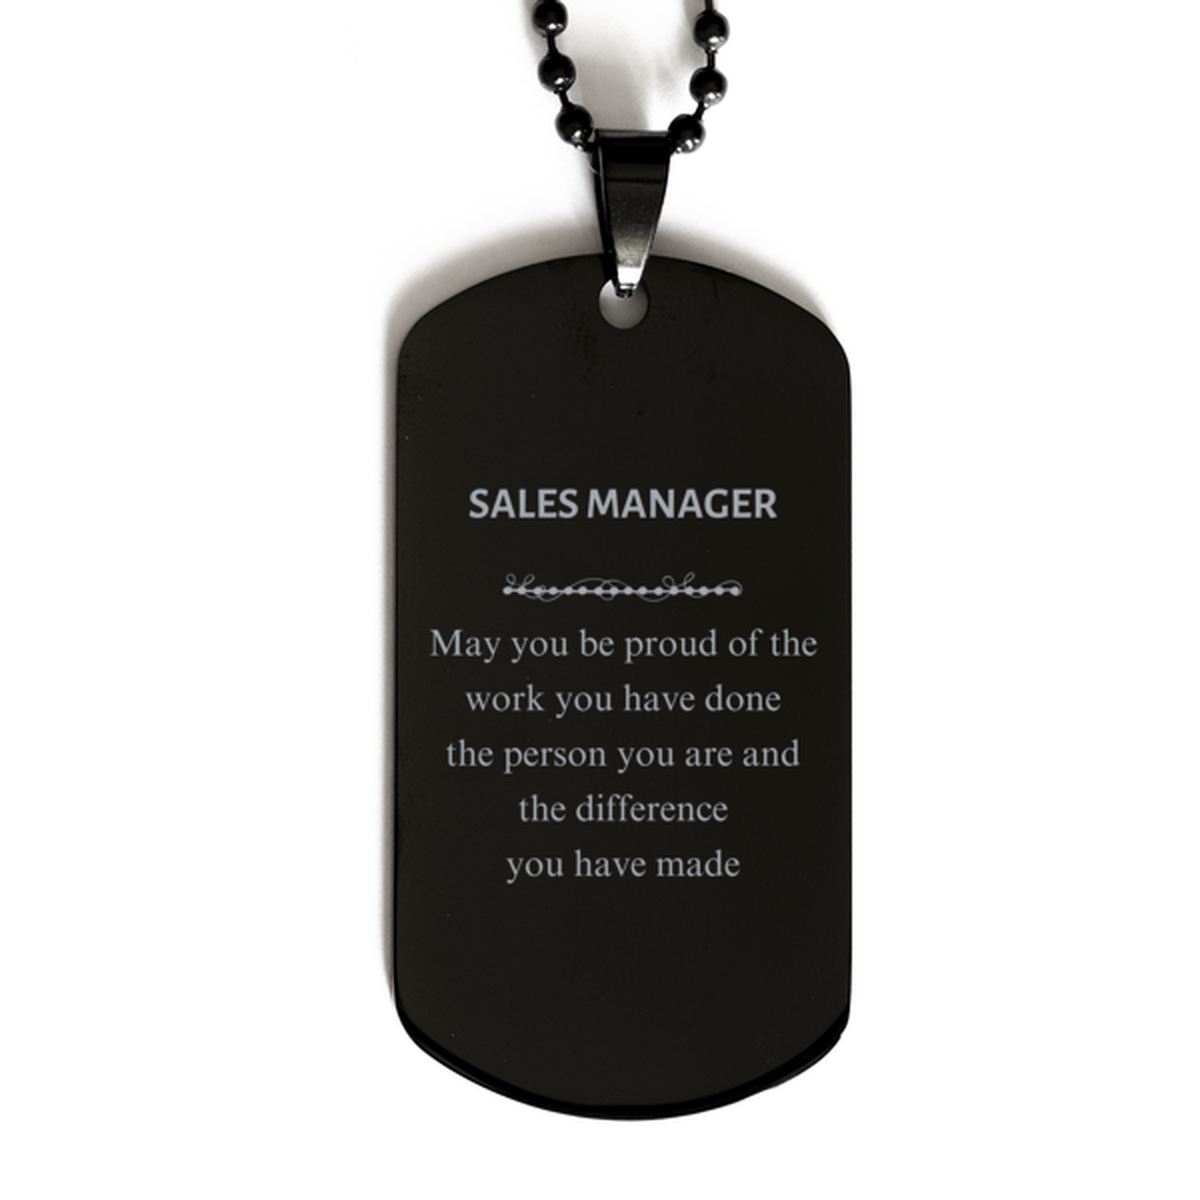 Sales Manager May you be proud of the work you have done, Retirement Sales Manager Black Dog Tag for Colleague Appreciation Gifts Amazing for Sales Manager